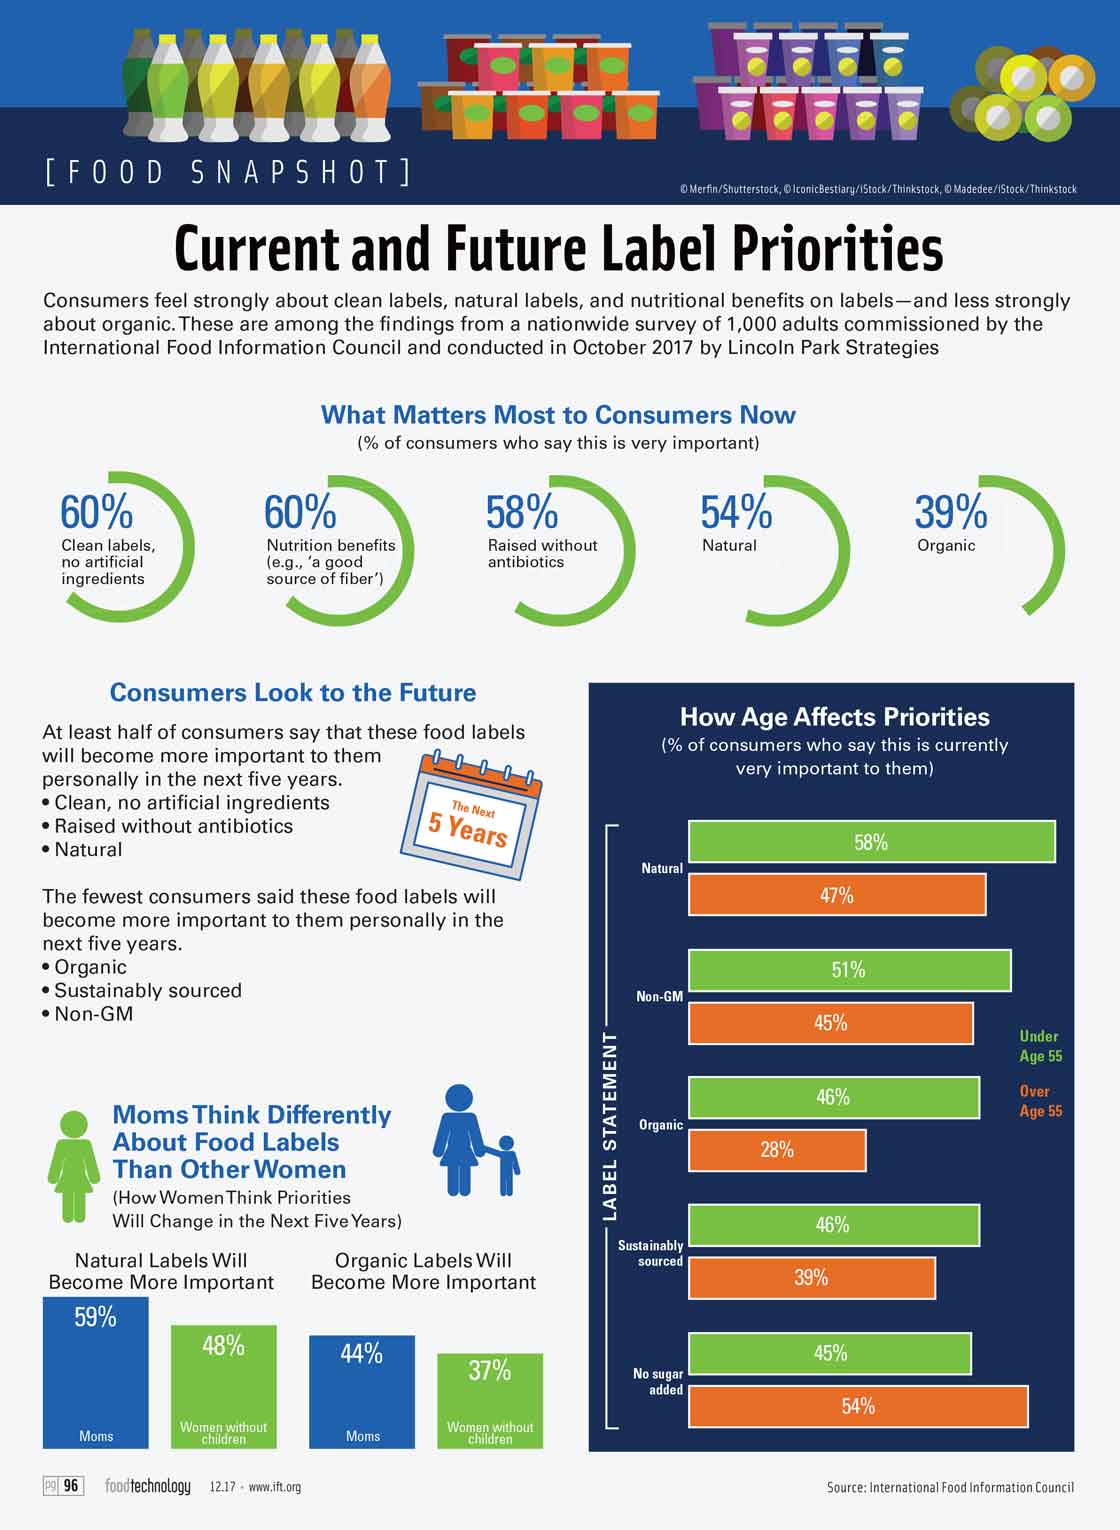 Current and Future Label Priorities. Source: International Food Information Council